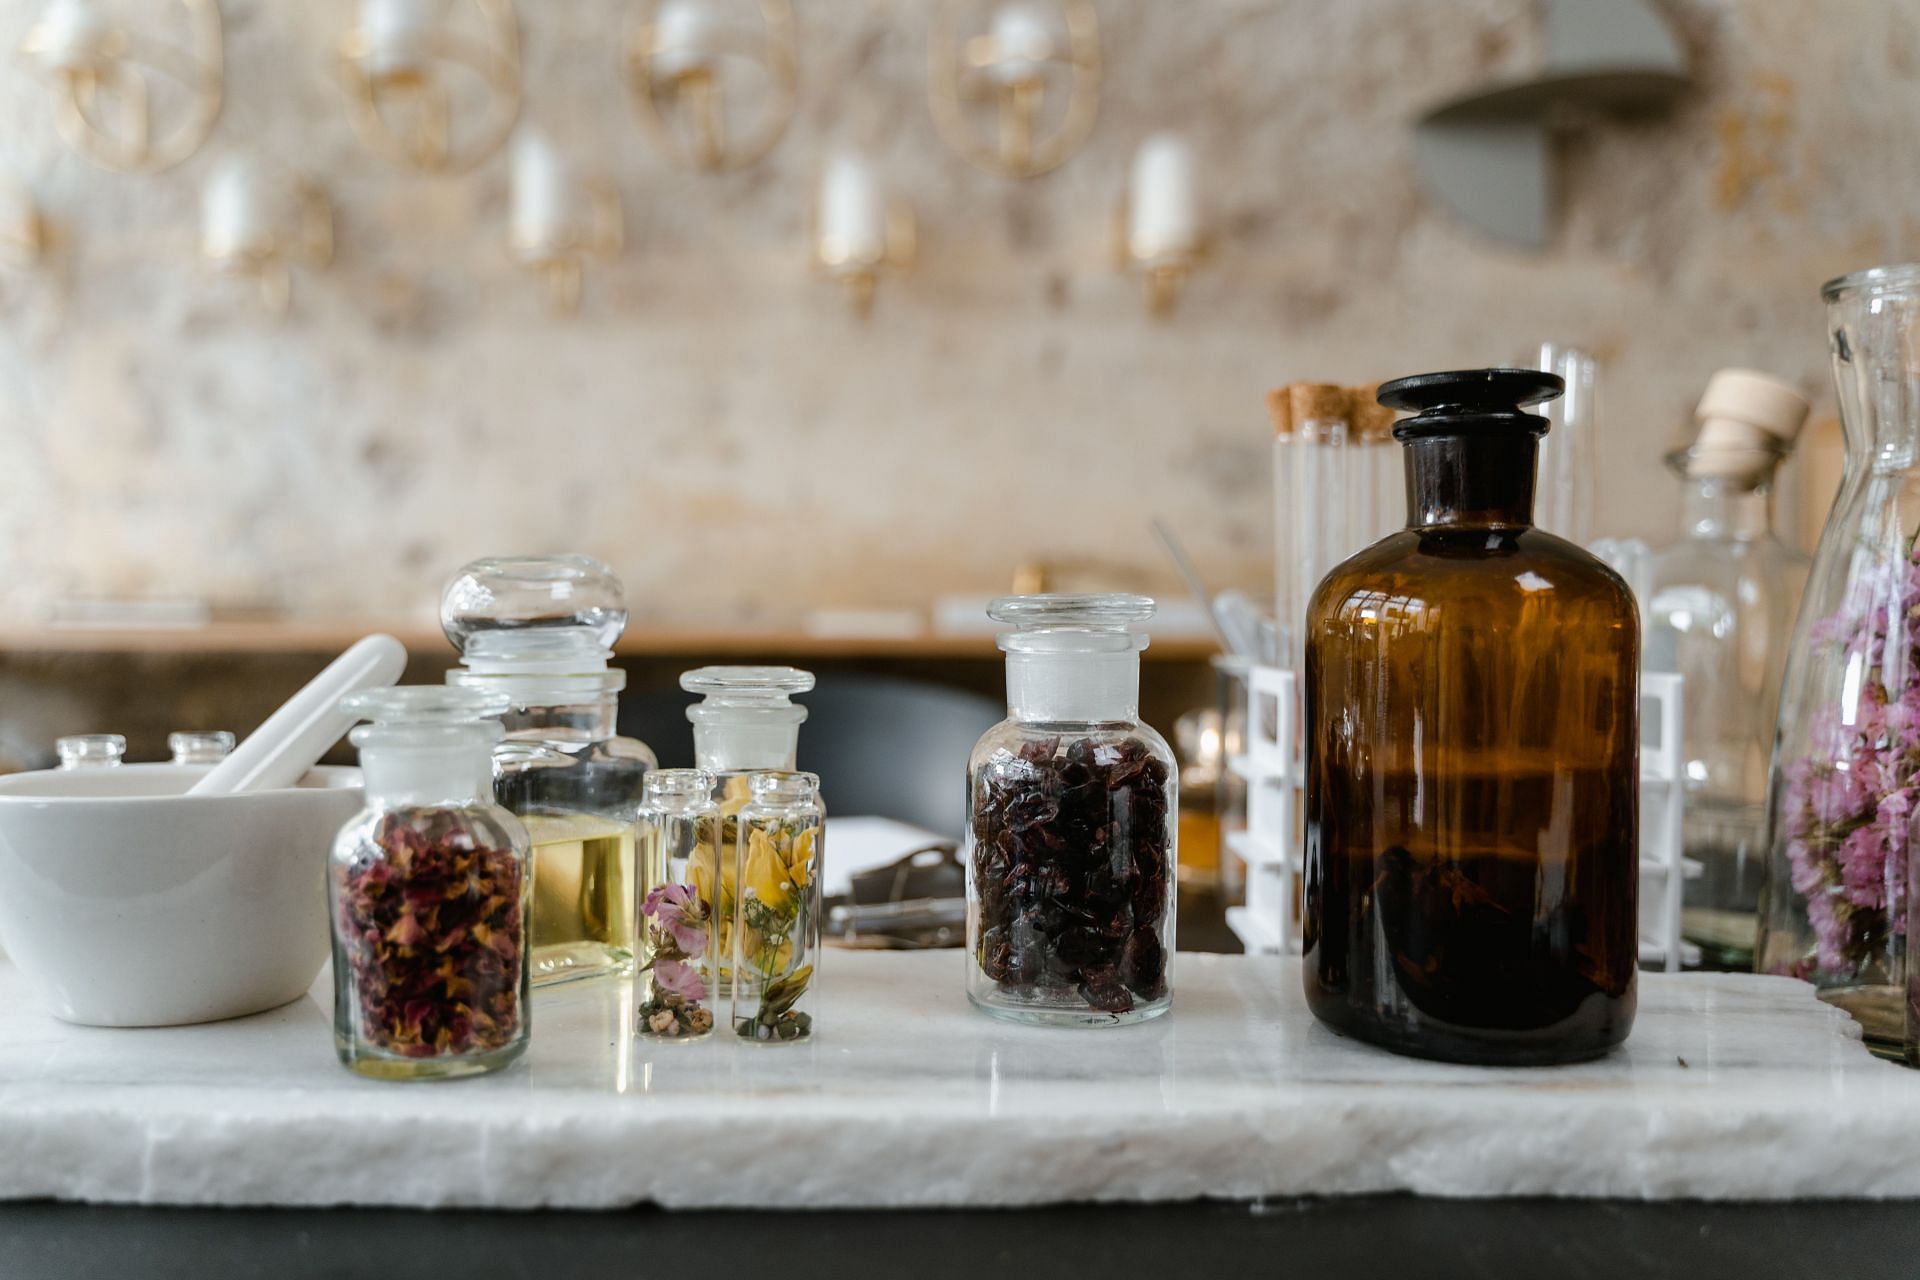 Always dilute essential oils before applying. (Image via Pexels/ Mart Production)